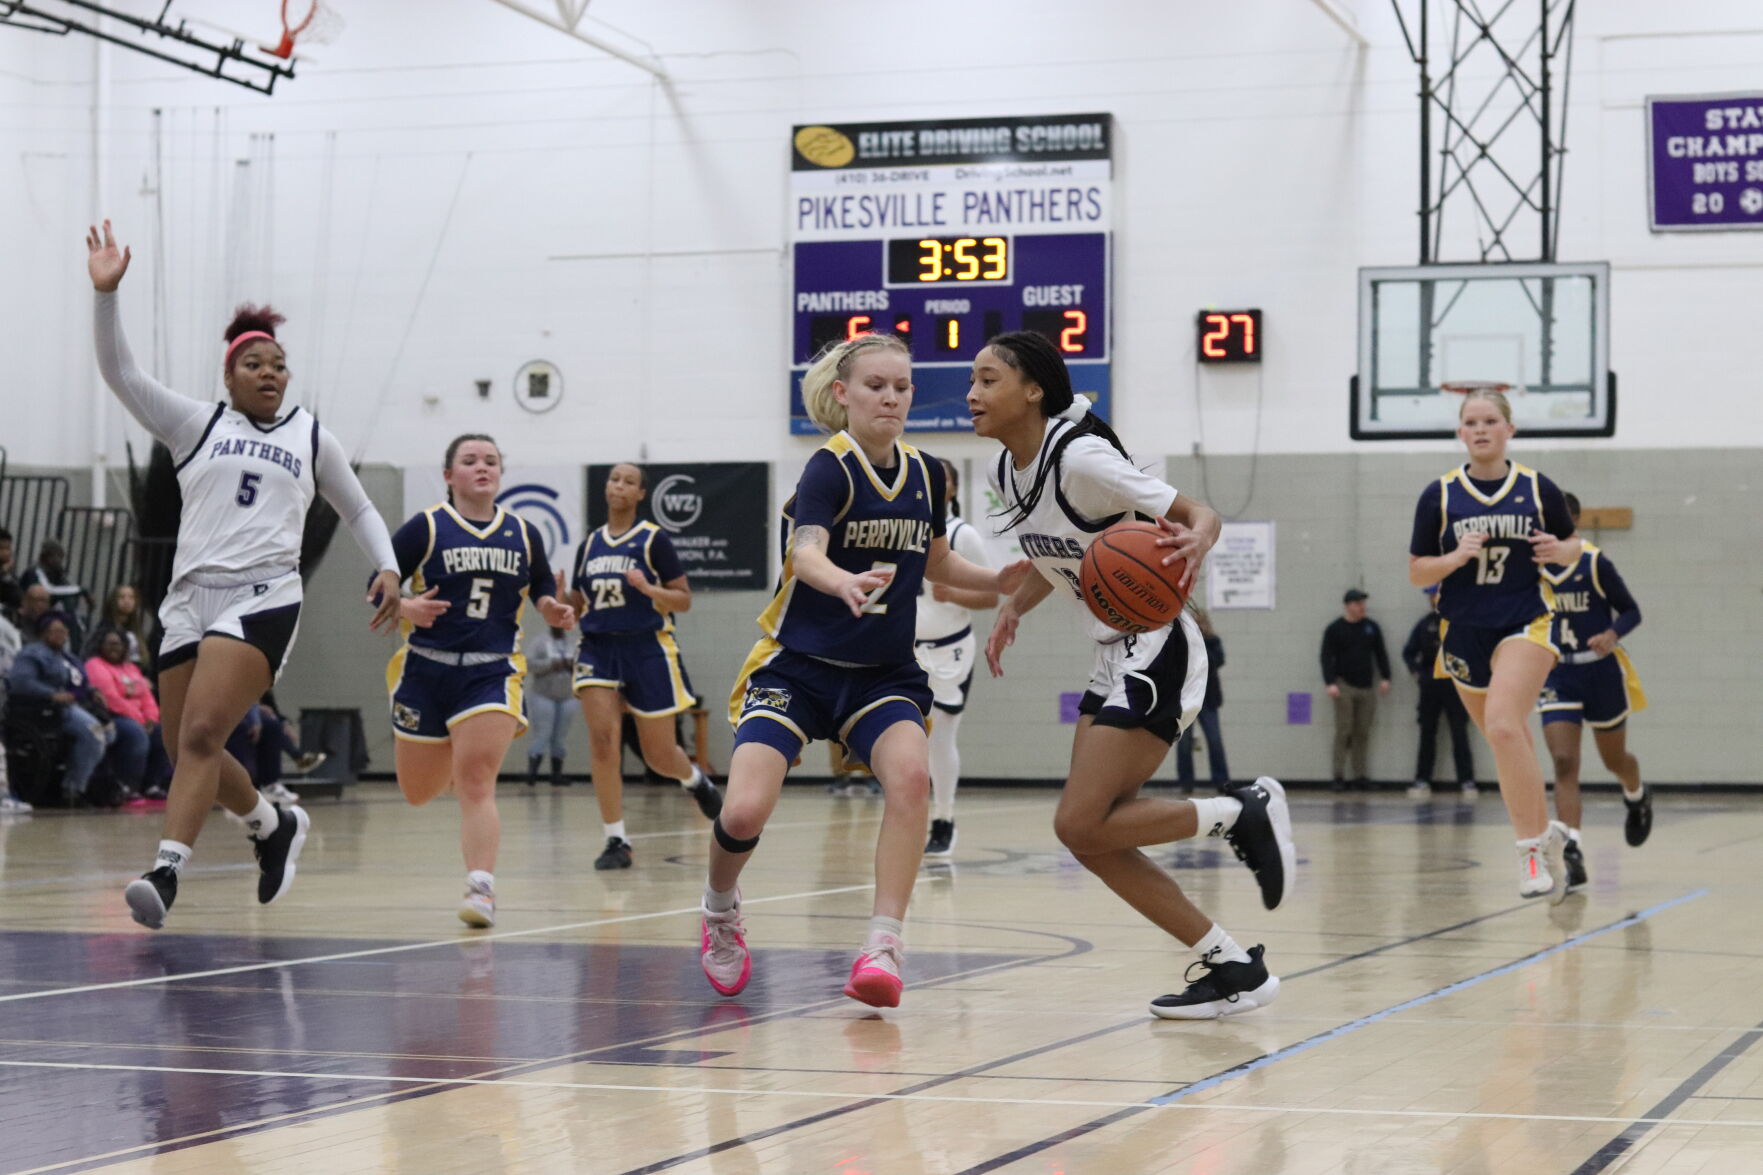 Perryville girls fall to Pikesville in 1A quarters